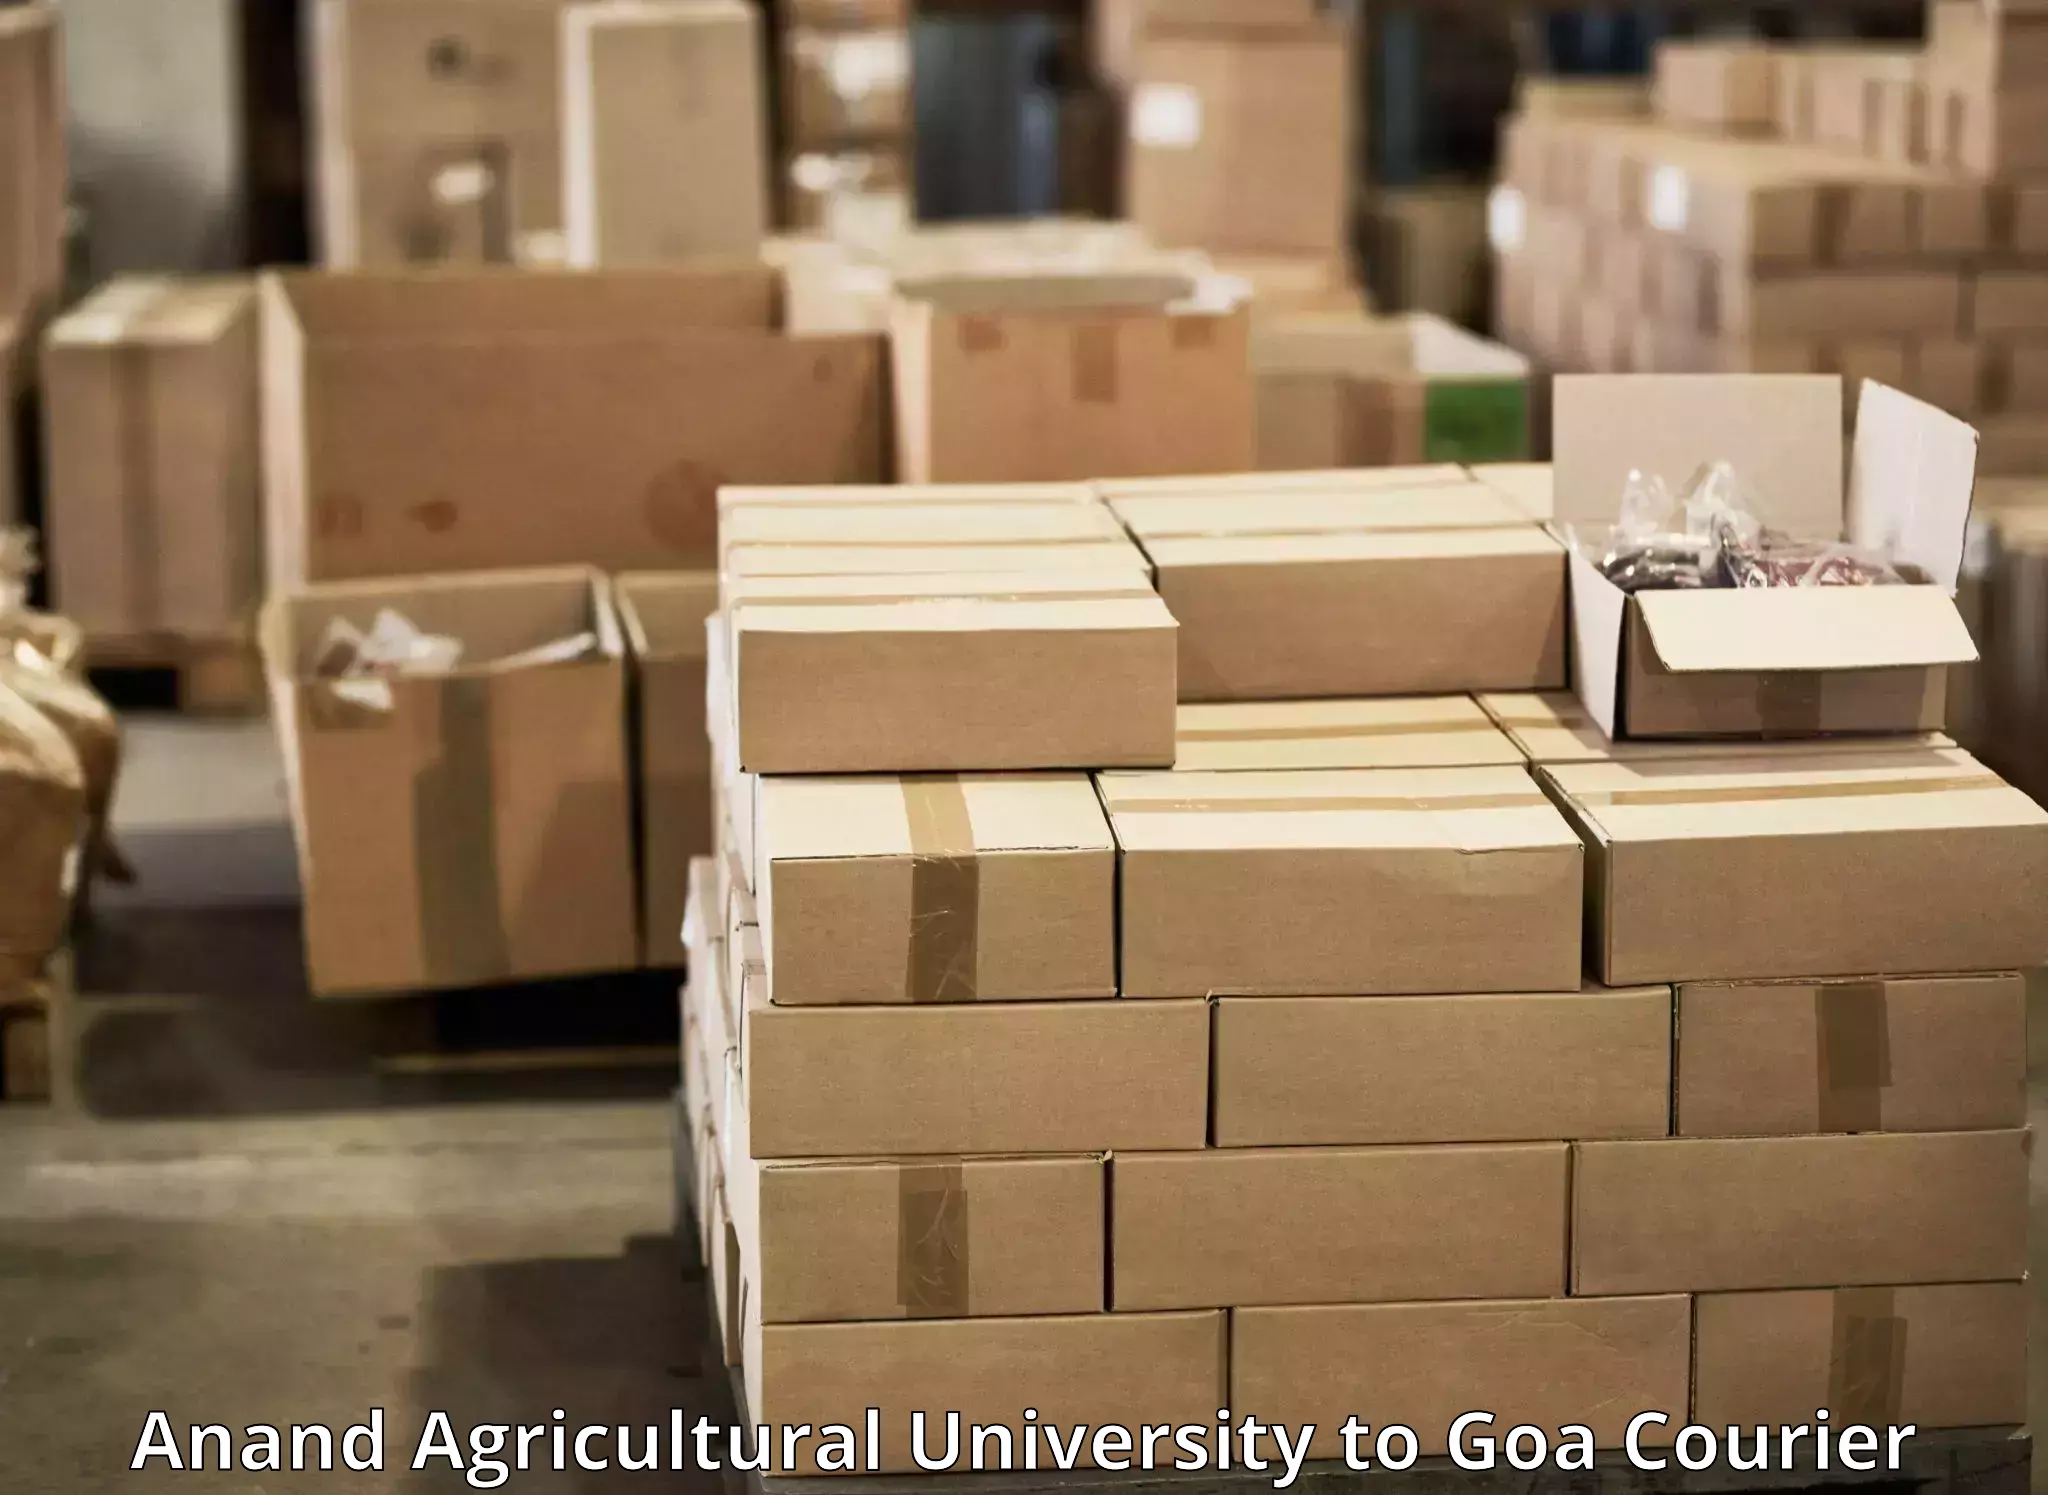 Professional parcel services Anand Agricultural University to IIT Goa